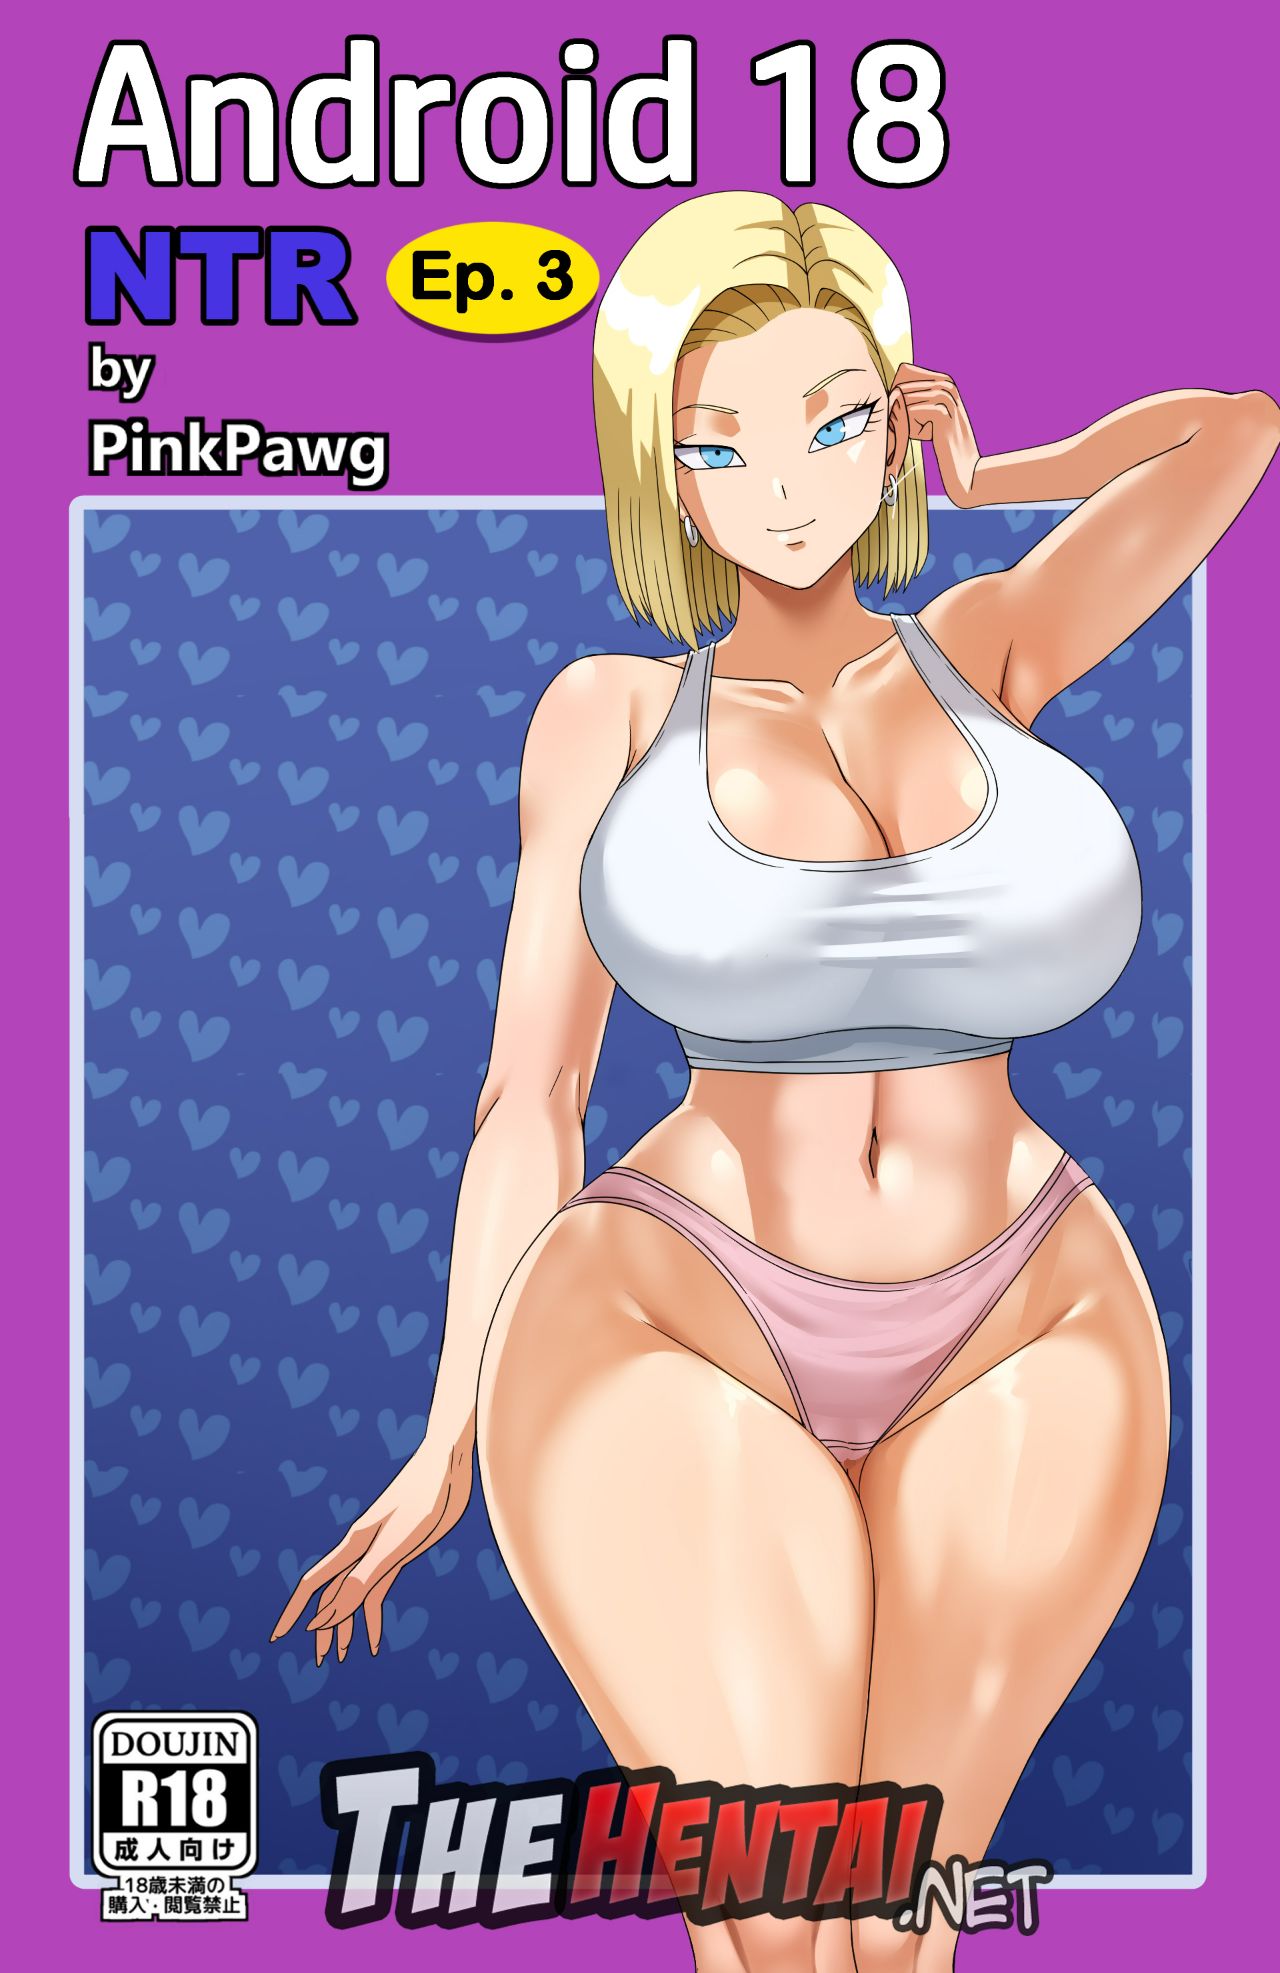 Android 18 NTR Part 3 Hentai pt-br 01